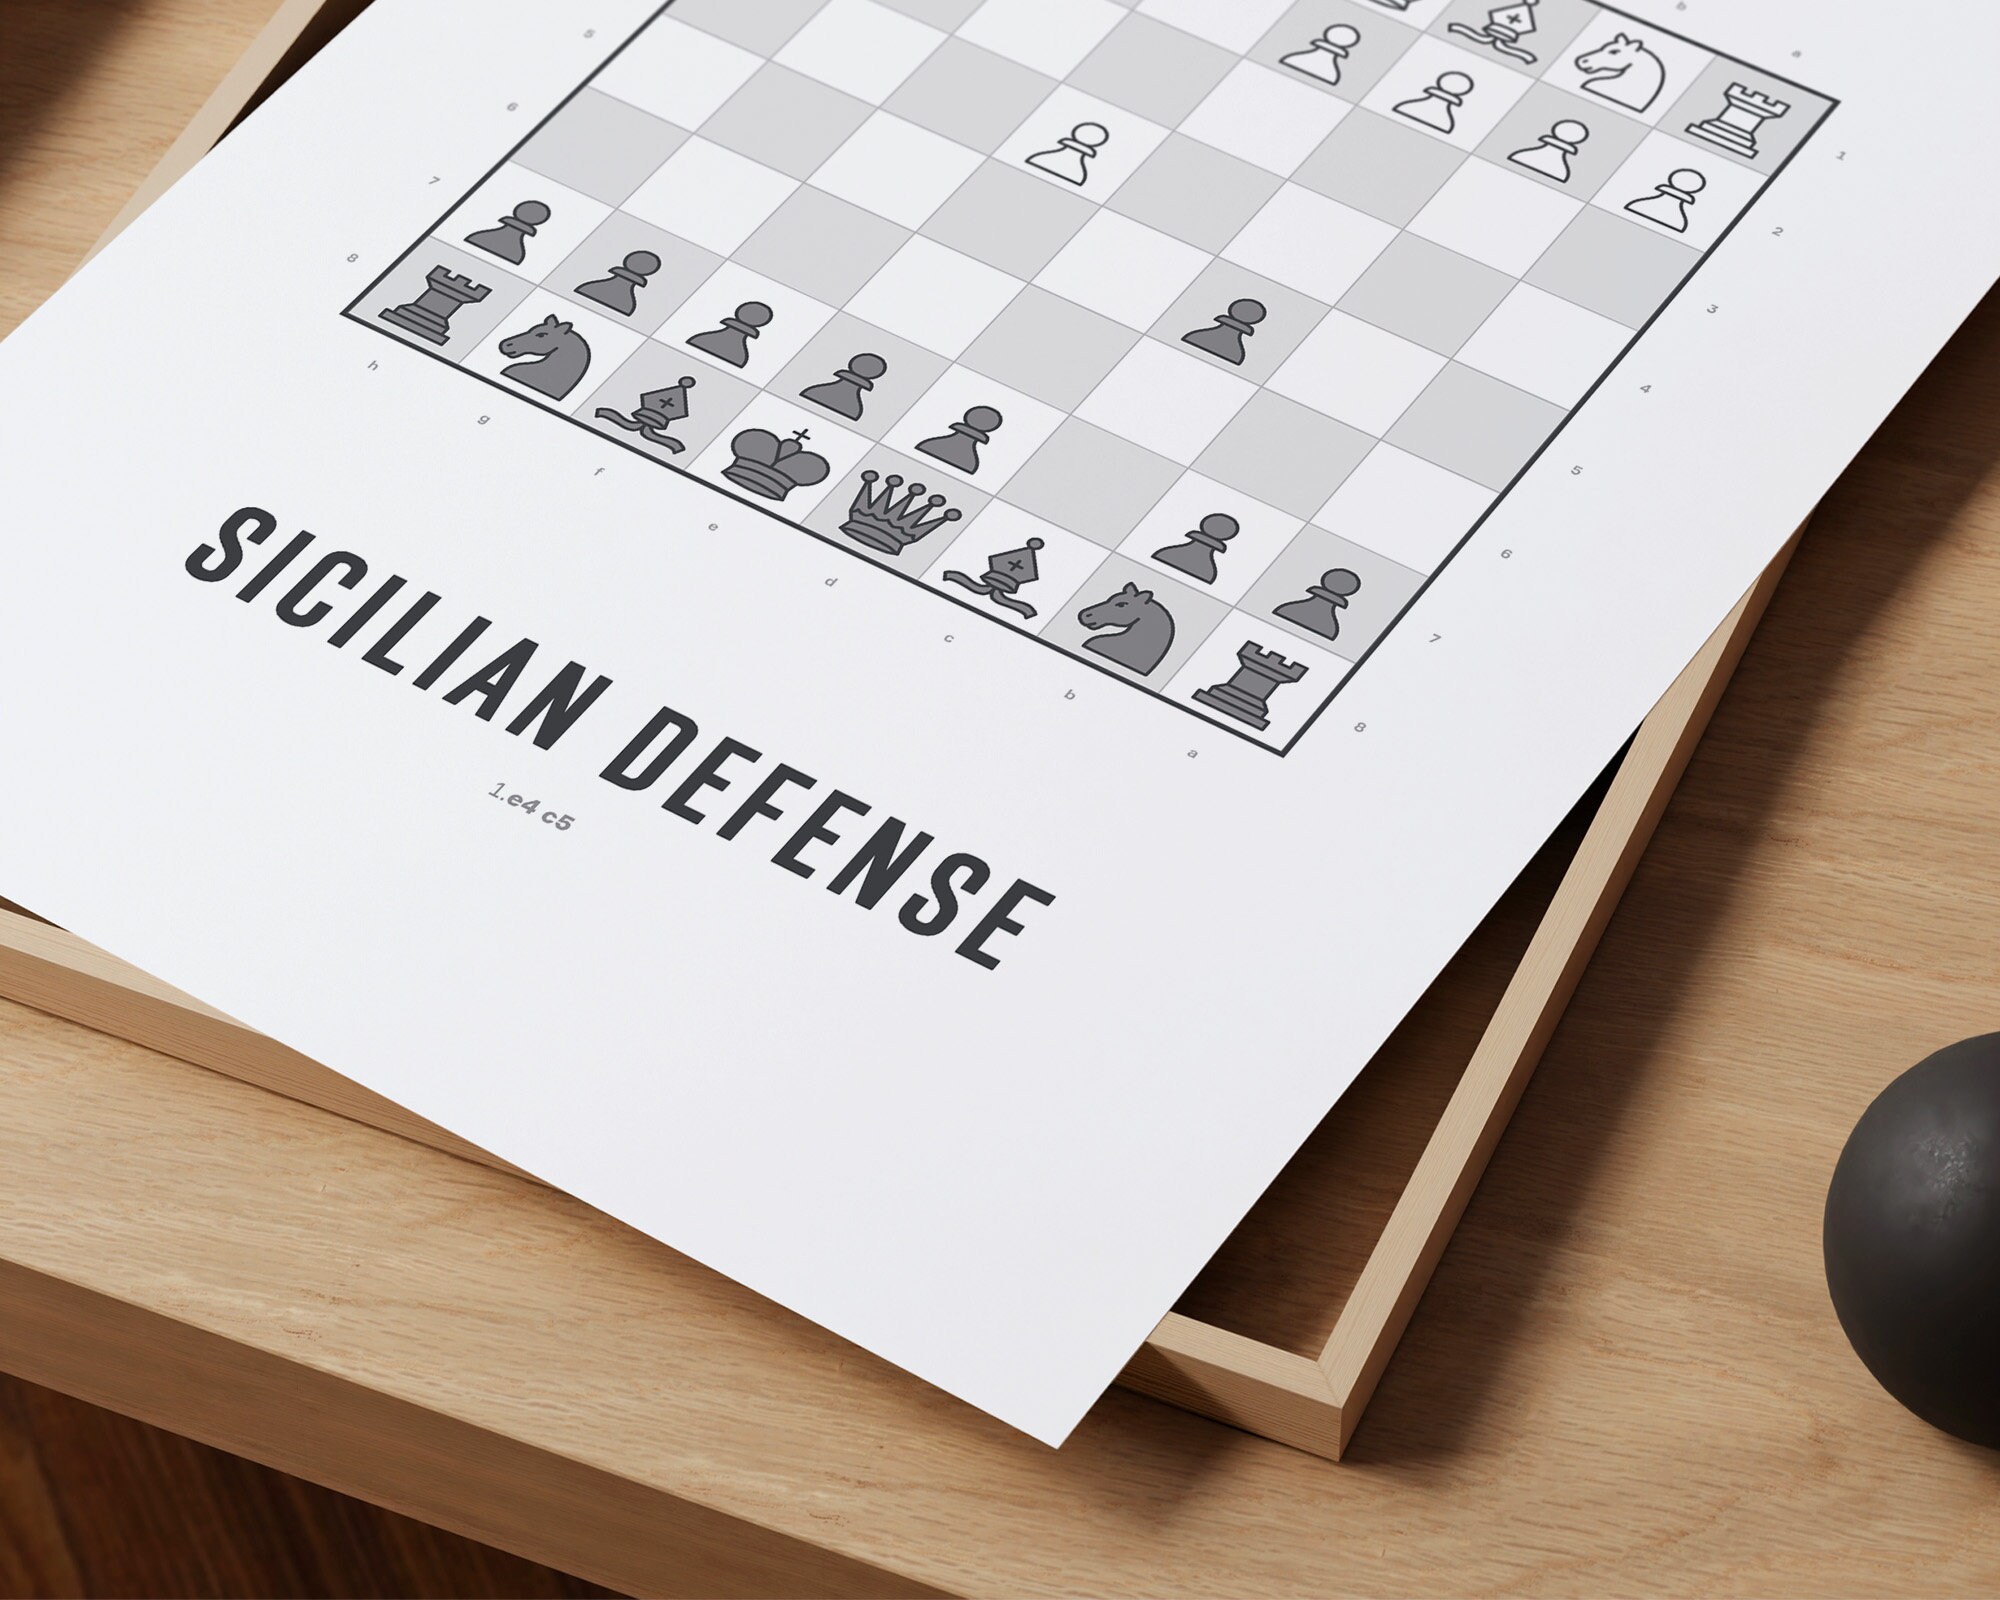 The Sicilian Defense Chess Opening Vintage Book Cover Poster Style |  Greeting Card